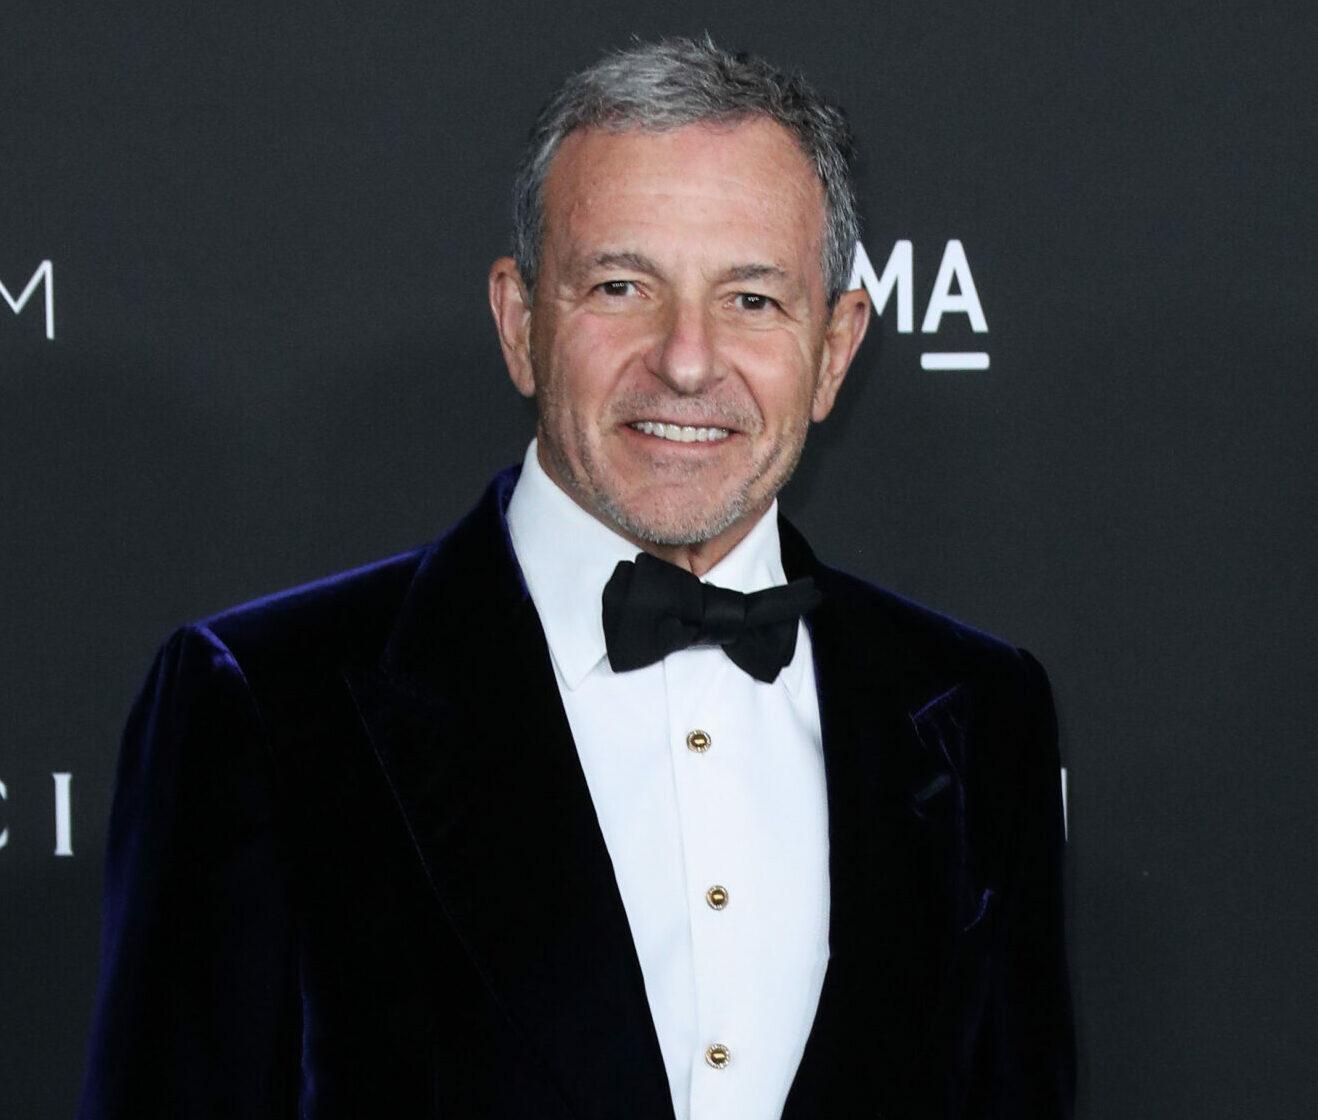 10th Annual LACMA Art + Film Gala 2021 held at the Los Angeles County Museum of Art on November 6, 2021 in Los Angeles, California, United States. 06 Nov 2021 Pictured: Bob Iger, Robert Iger.